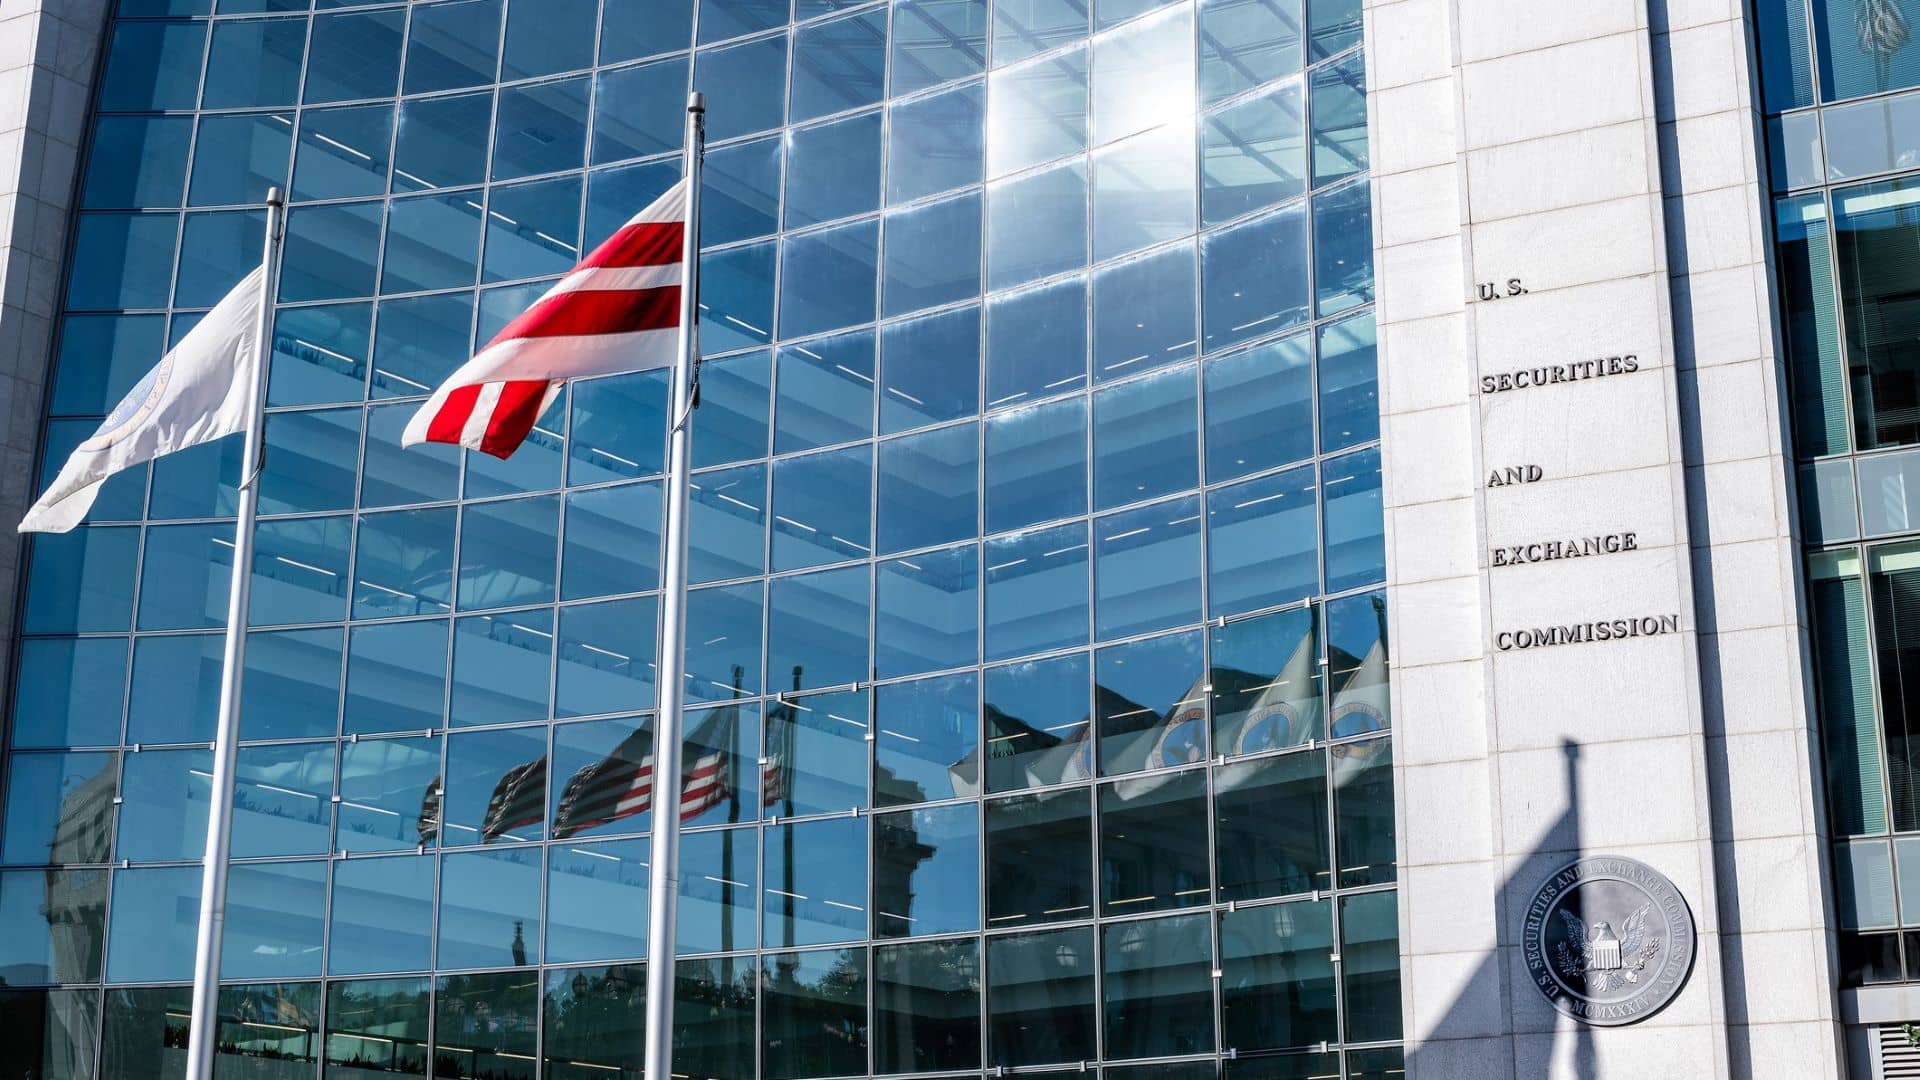 United States Securities and Exchange Commission SEC architecture closeup with modern building sign and logo with red flags by glass windows.